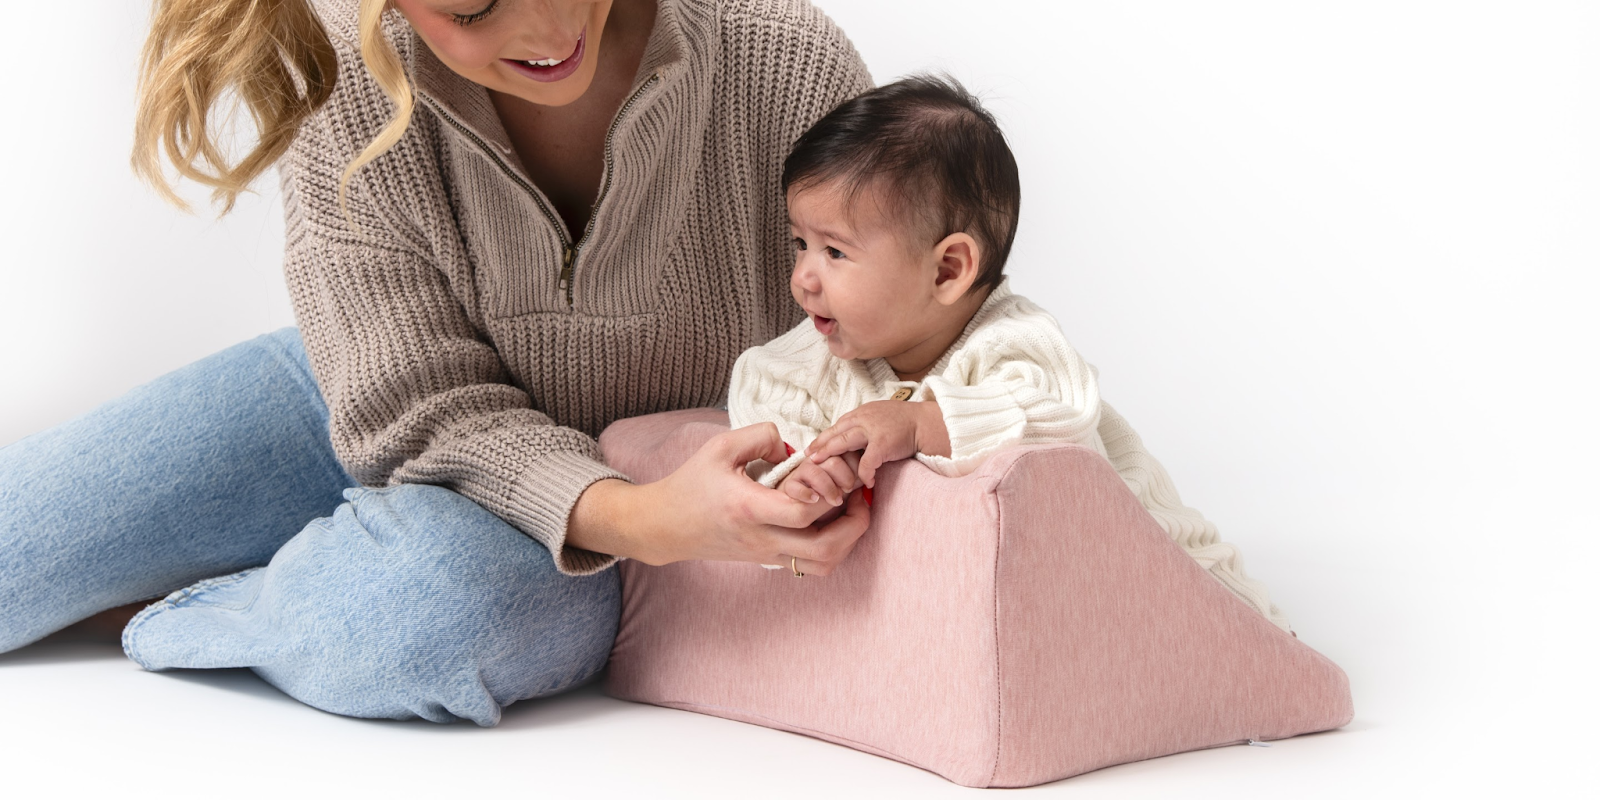 Introducing the Vonu Lounger- A Safe and Simple Solution for Infant Gas and Reflux Relief